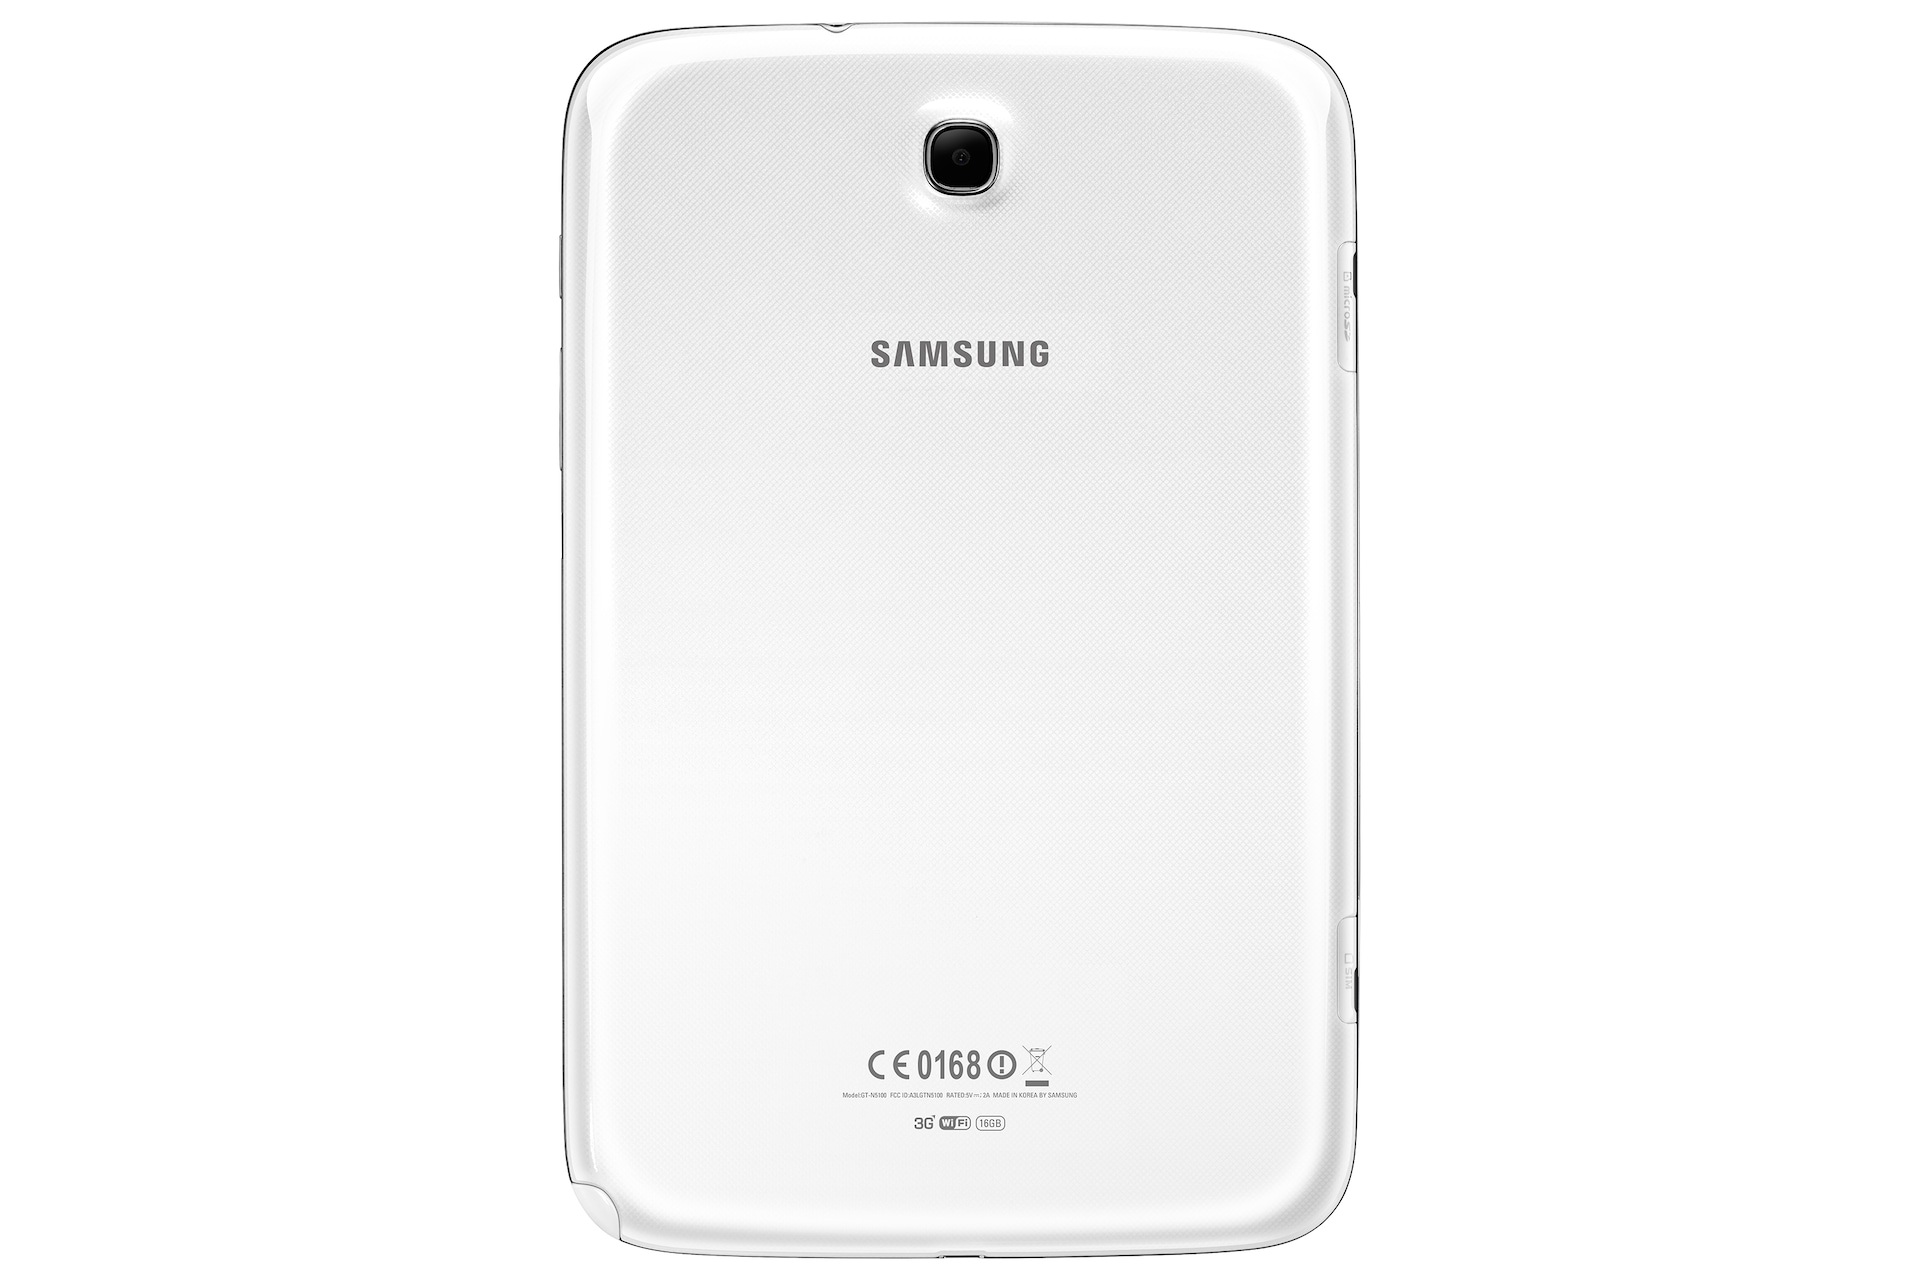 http://images.samsung.com/is/image/samsung/id_GT-N5100ZWAXSE_000179830_Standard?$Download-Source$